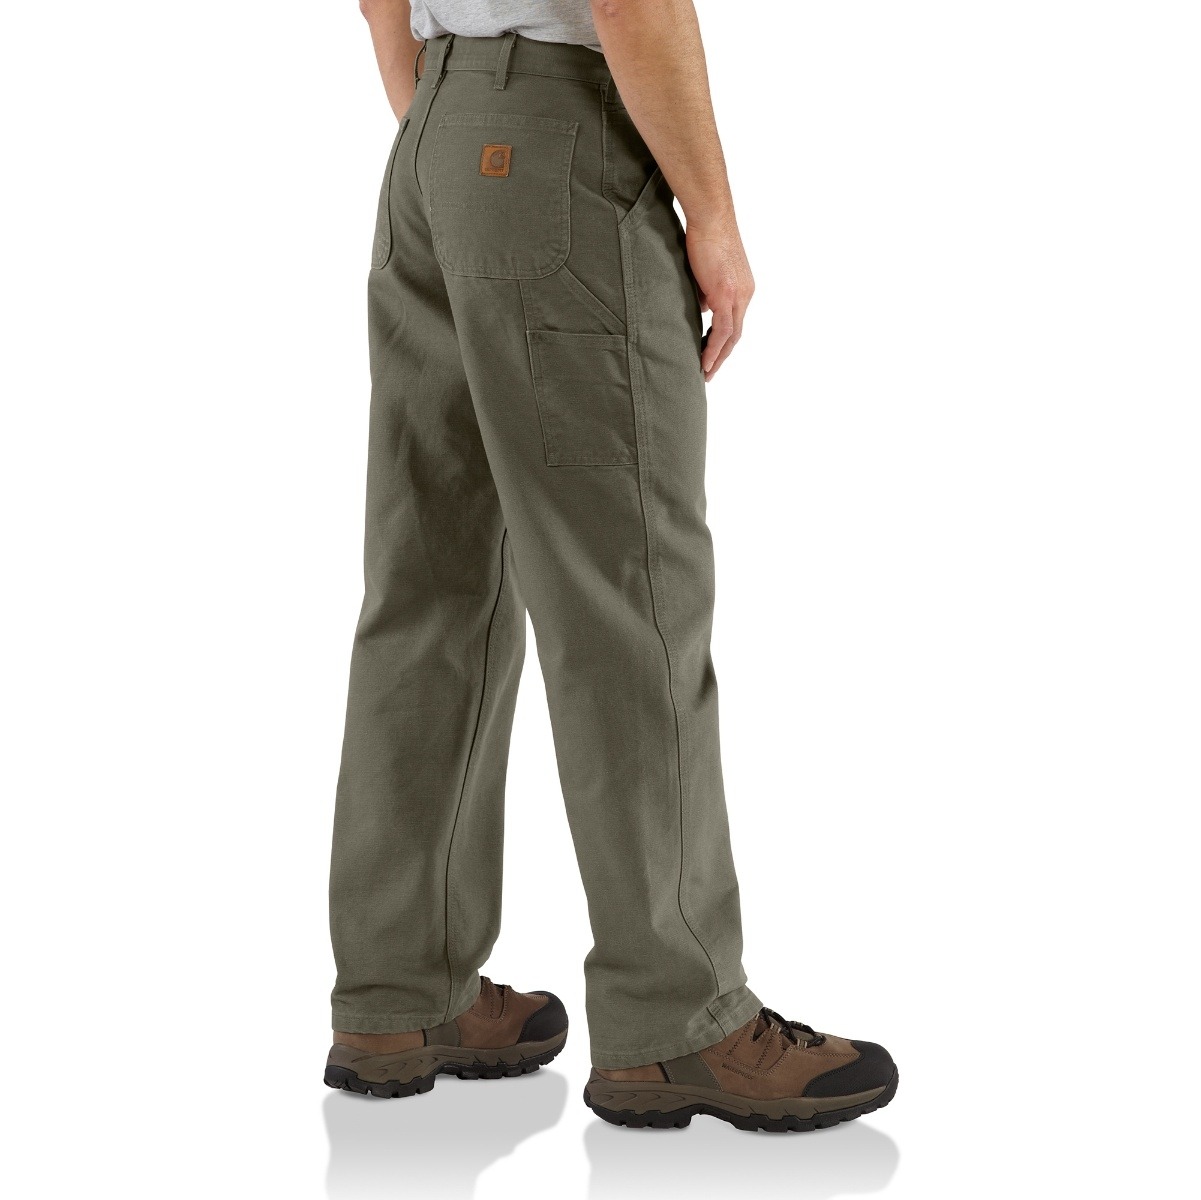 Rugged Professional™ Series Rugged Flex® Relaxed Fit, 49% OFF